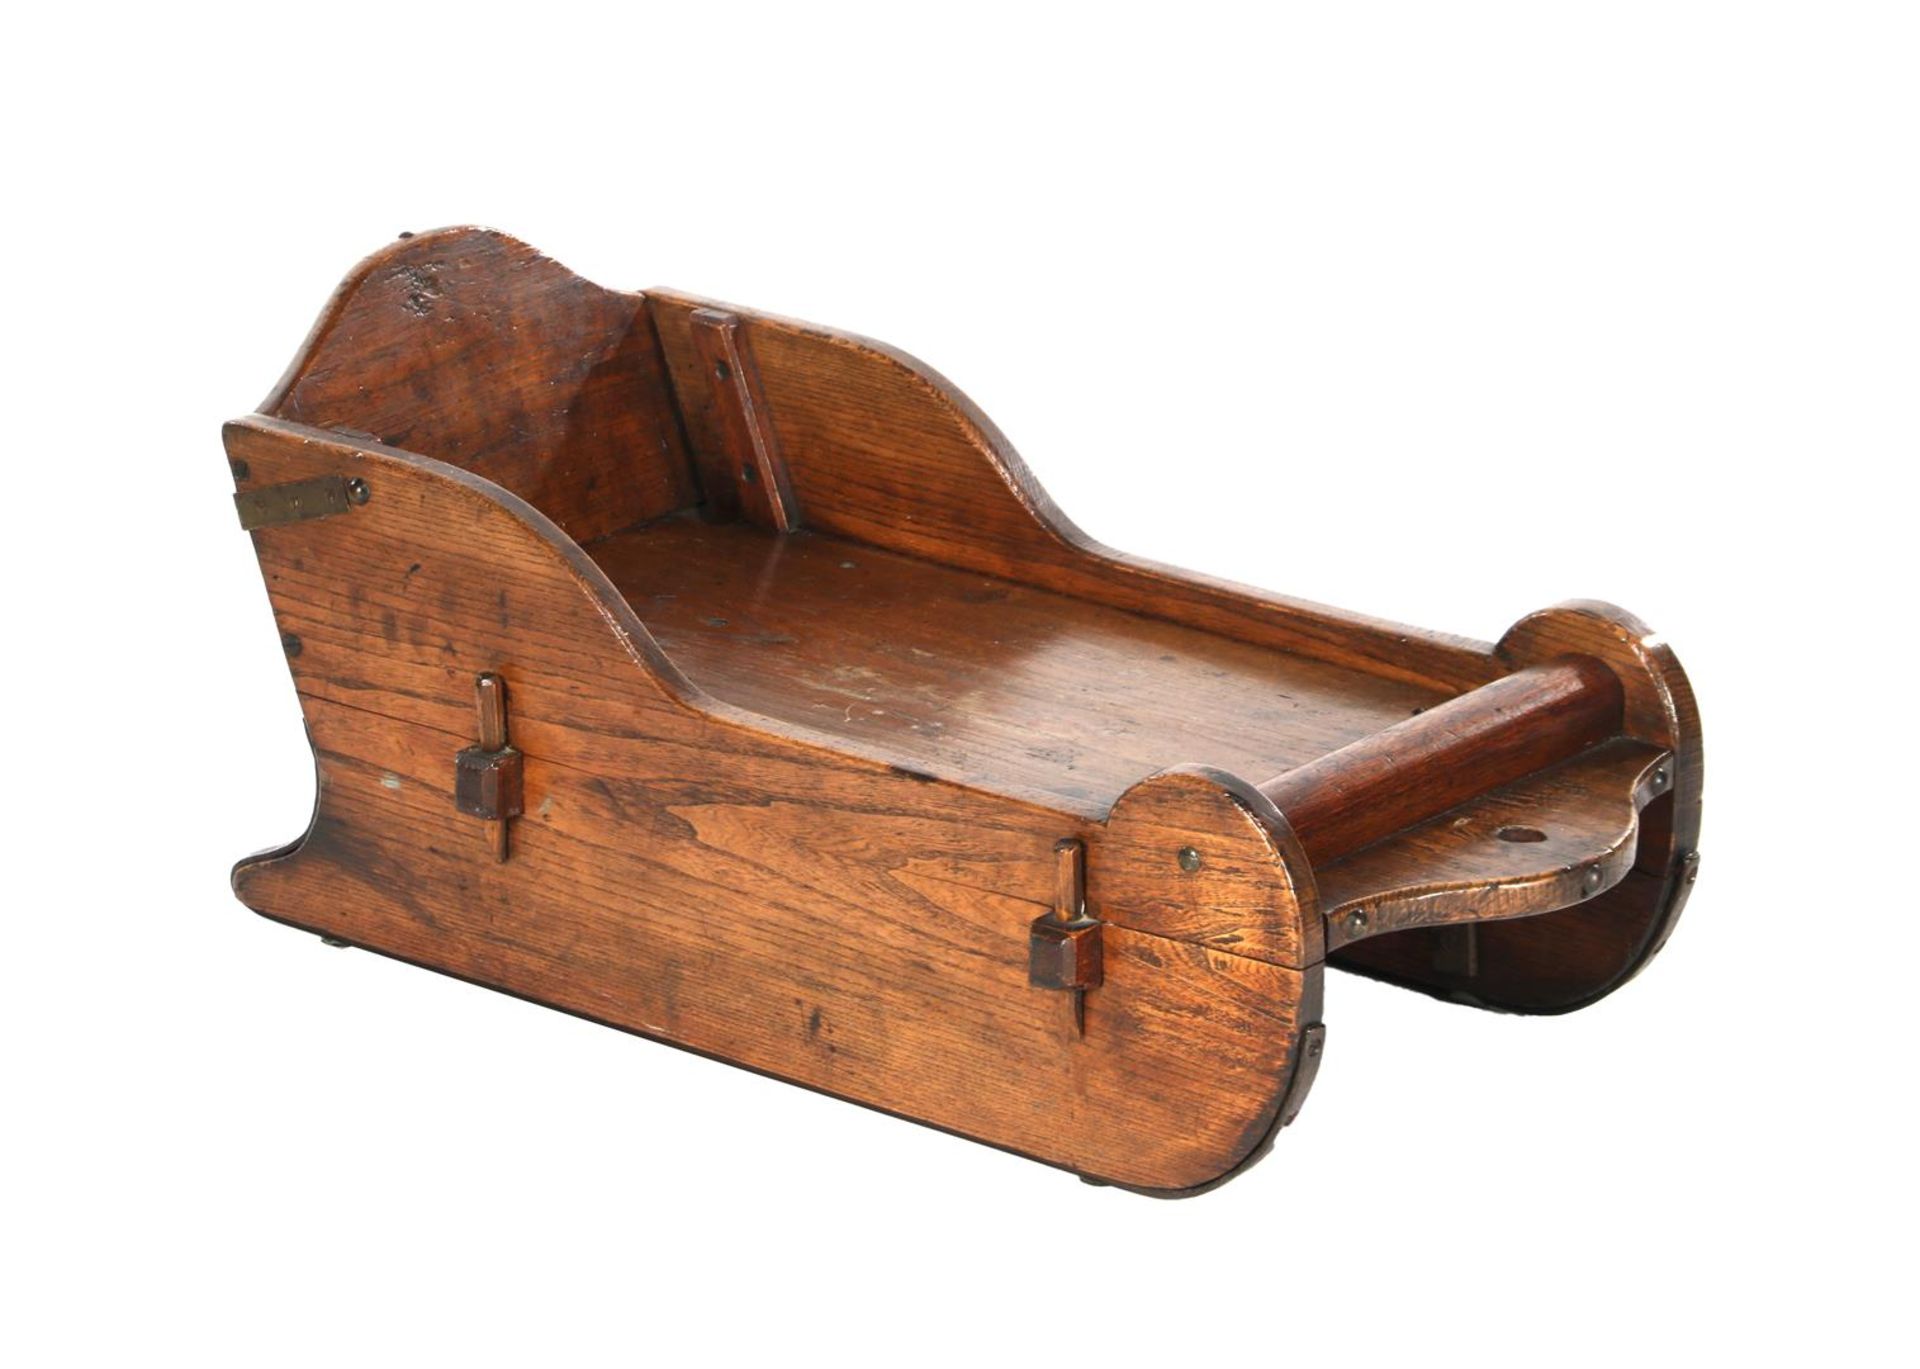 Old wooden sled